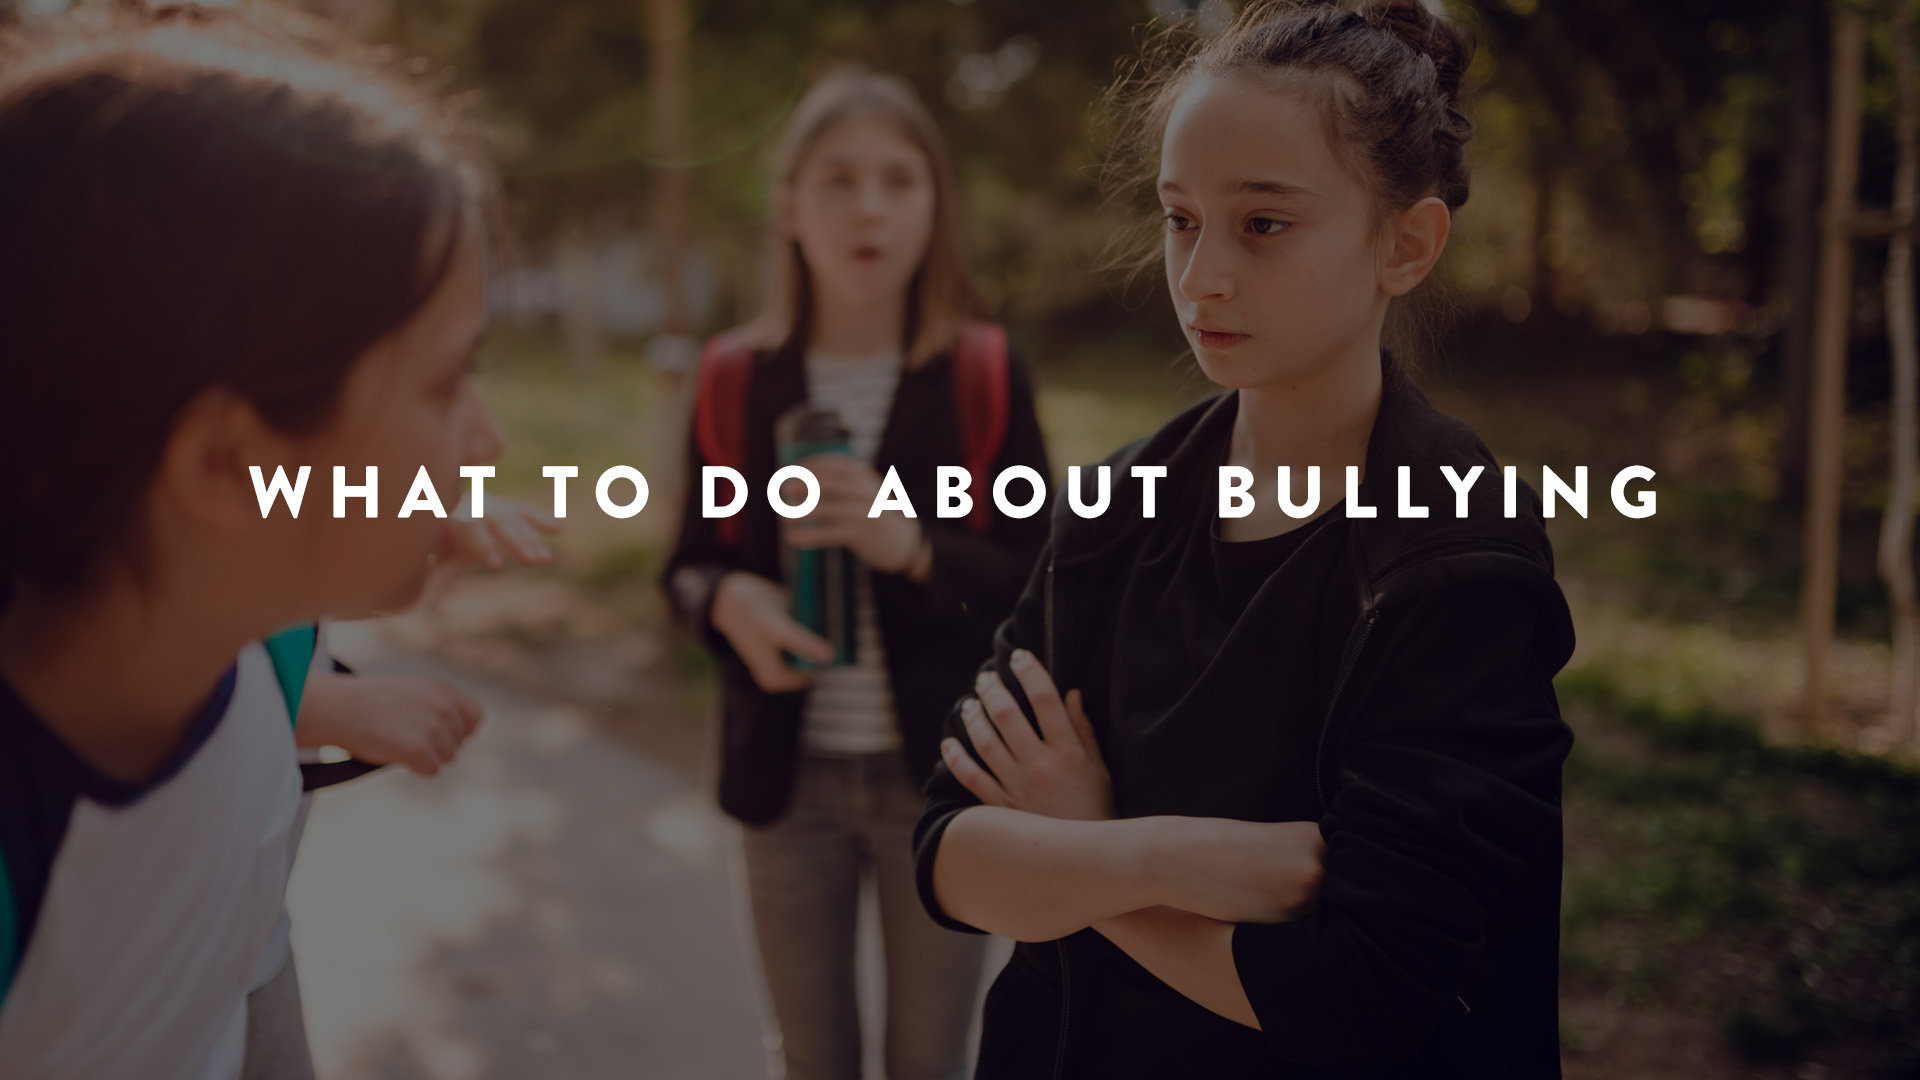 What to do about bullying